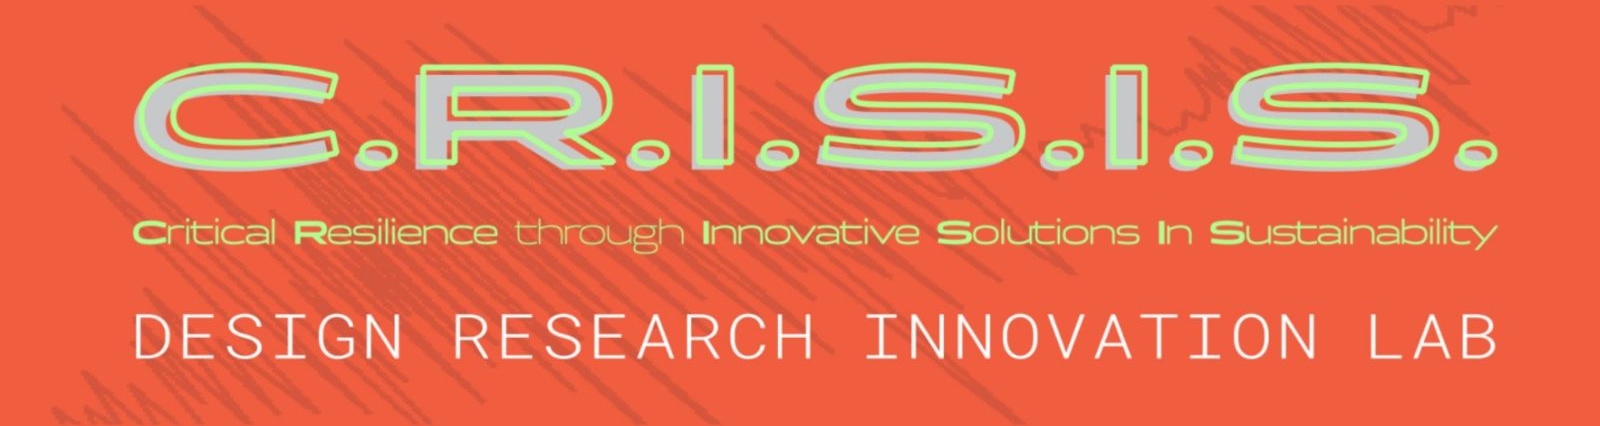 Logo for CRISIS research group on orange background